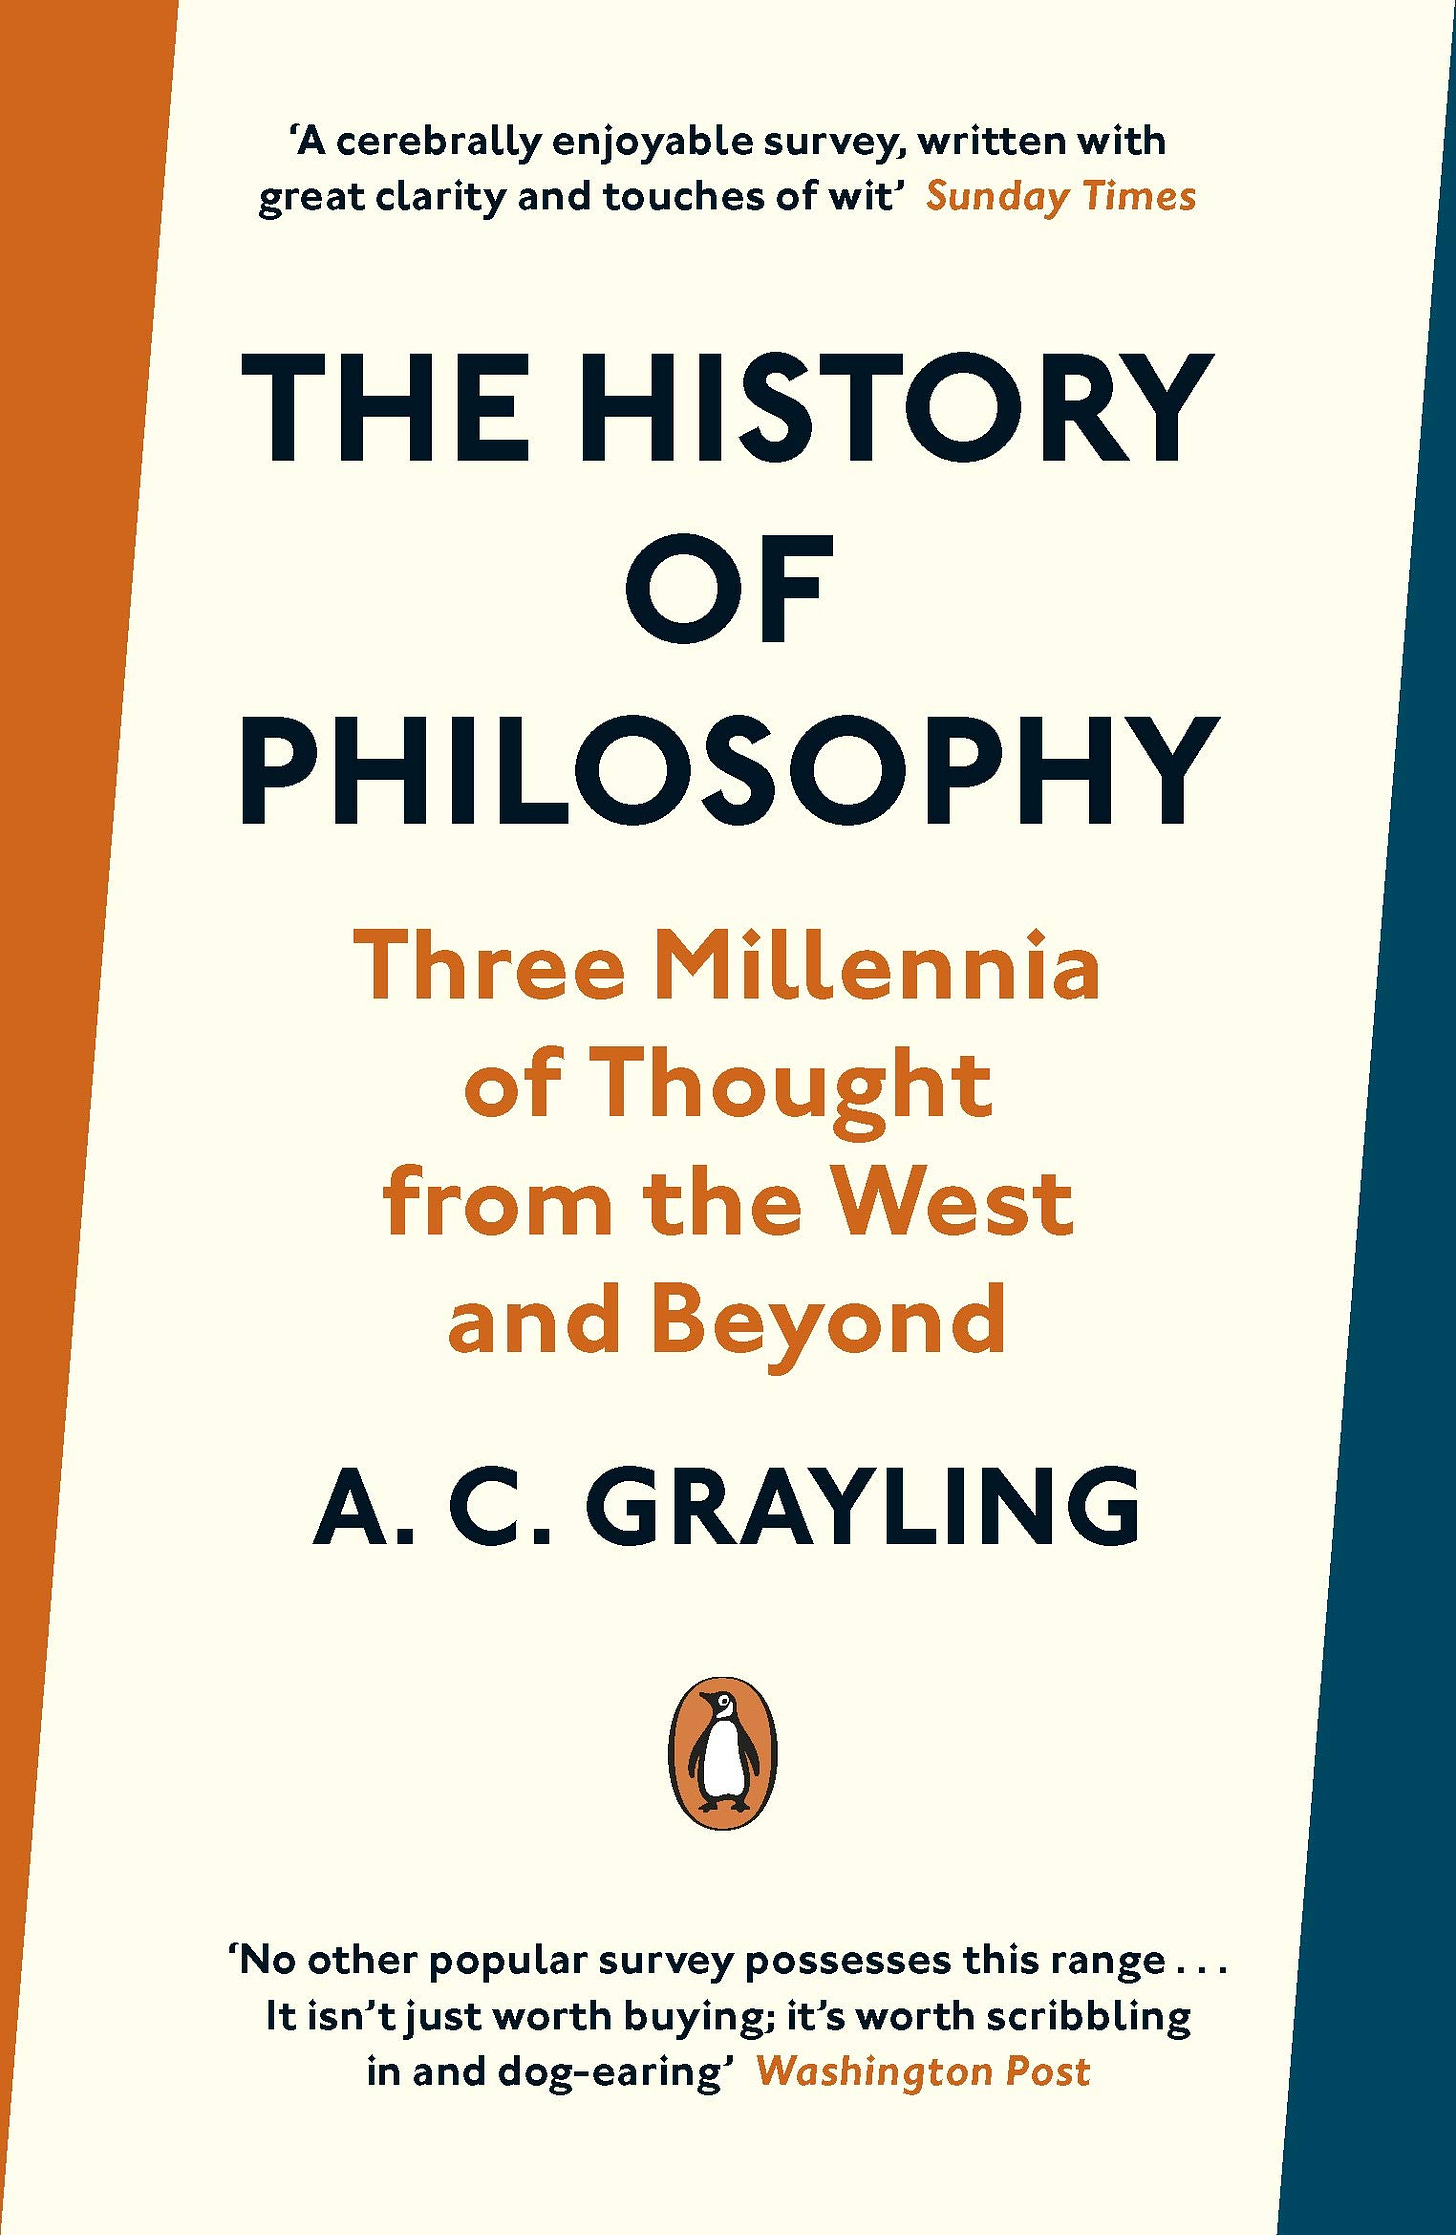 Buy The History of Philosophy Book Online at Low Prices in India | The  History of Philosophy Reviews & Ratings - Amazon.in